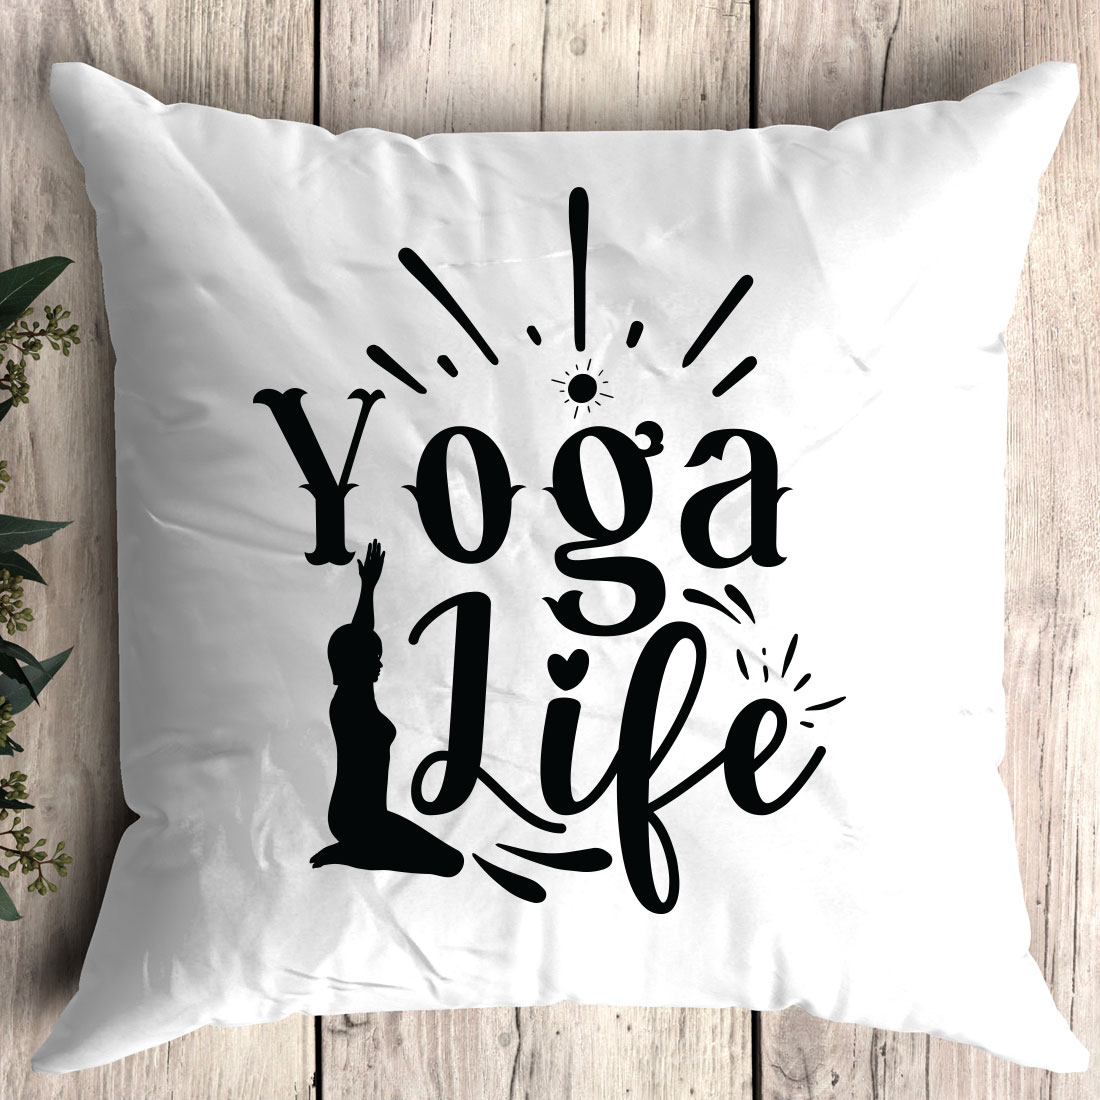 White pillow with the words yoga life printed on it.